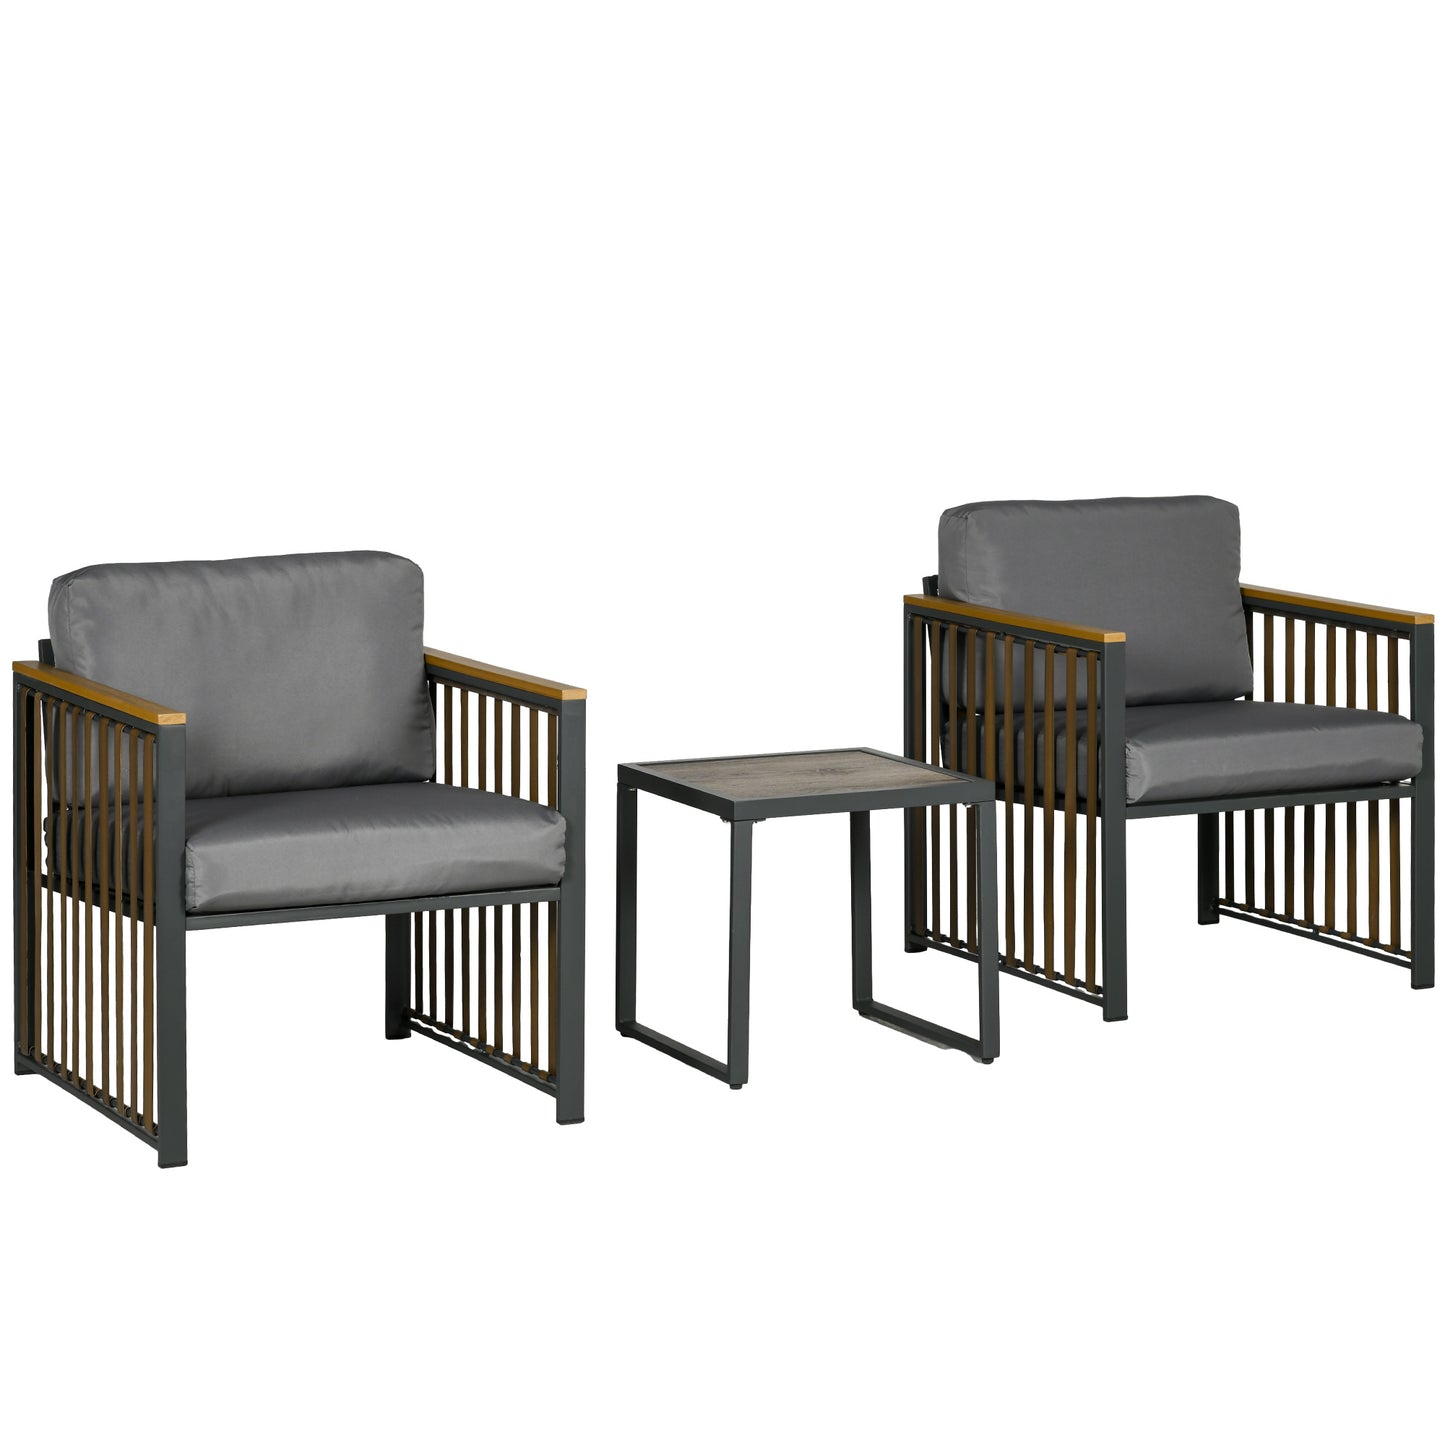 Outsunny garden set 3 pieces in rattan and steel with 2 chairs 66x68x68 cm and coffee table 45x45x44 cm